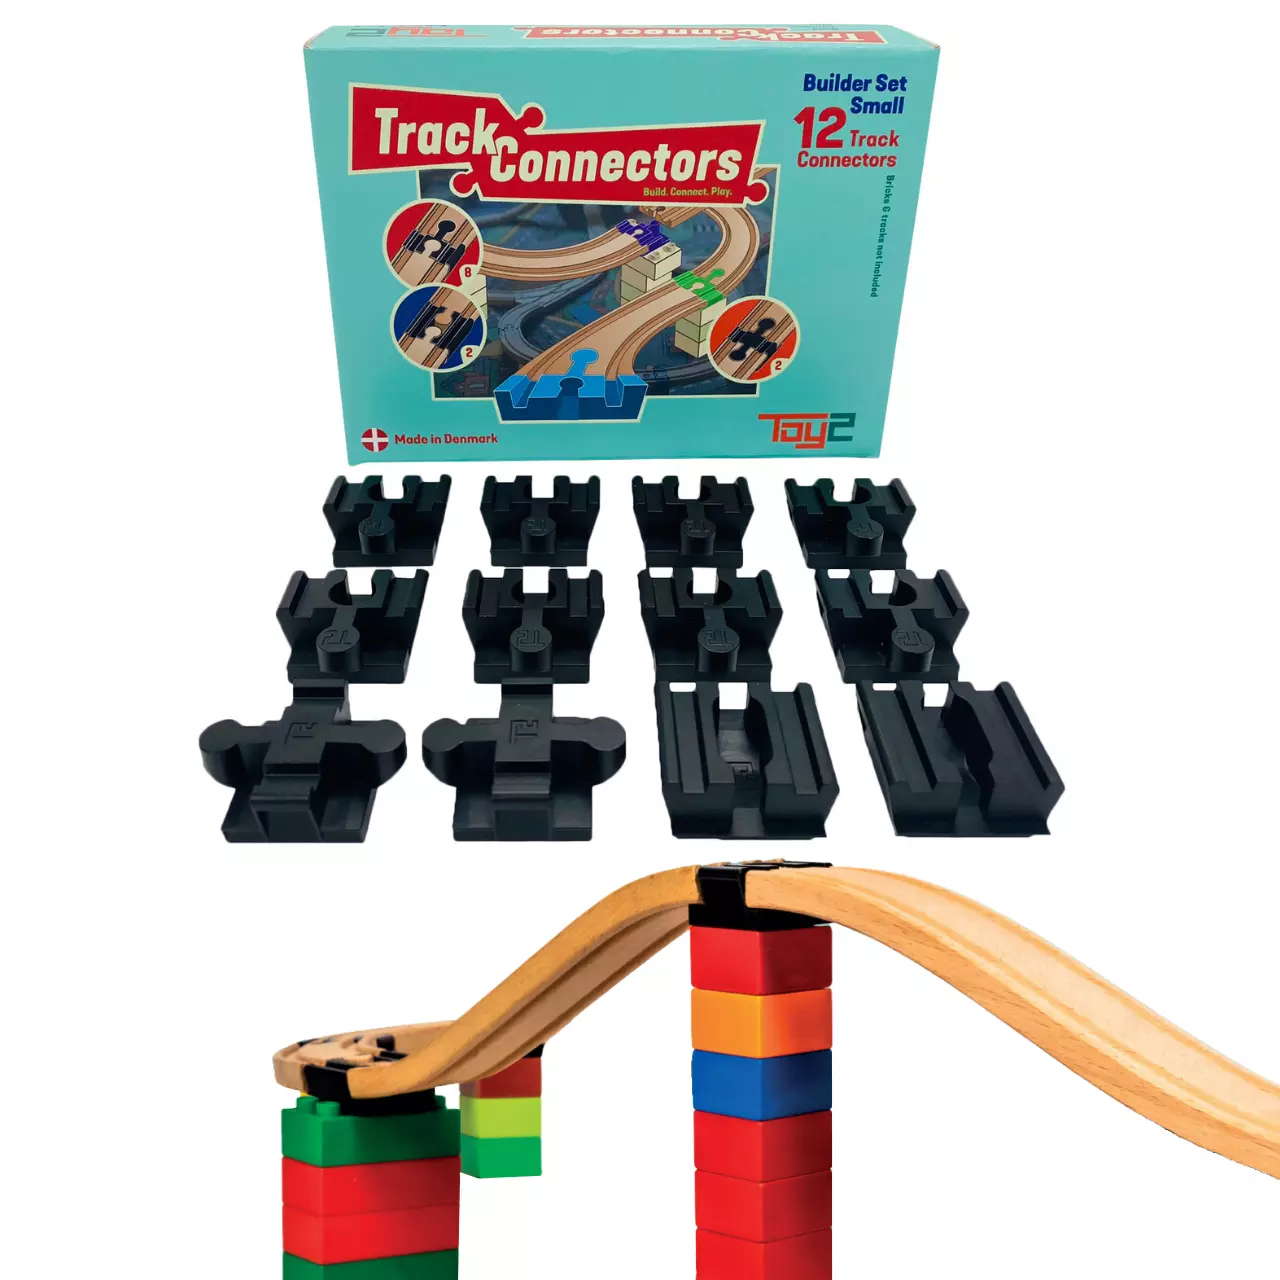 Track Connector Builder Set Small 21001